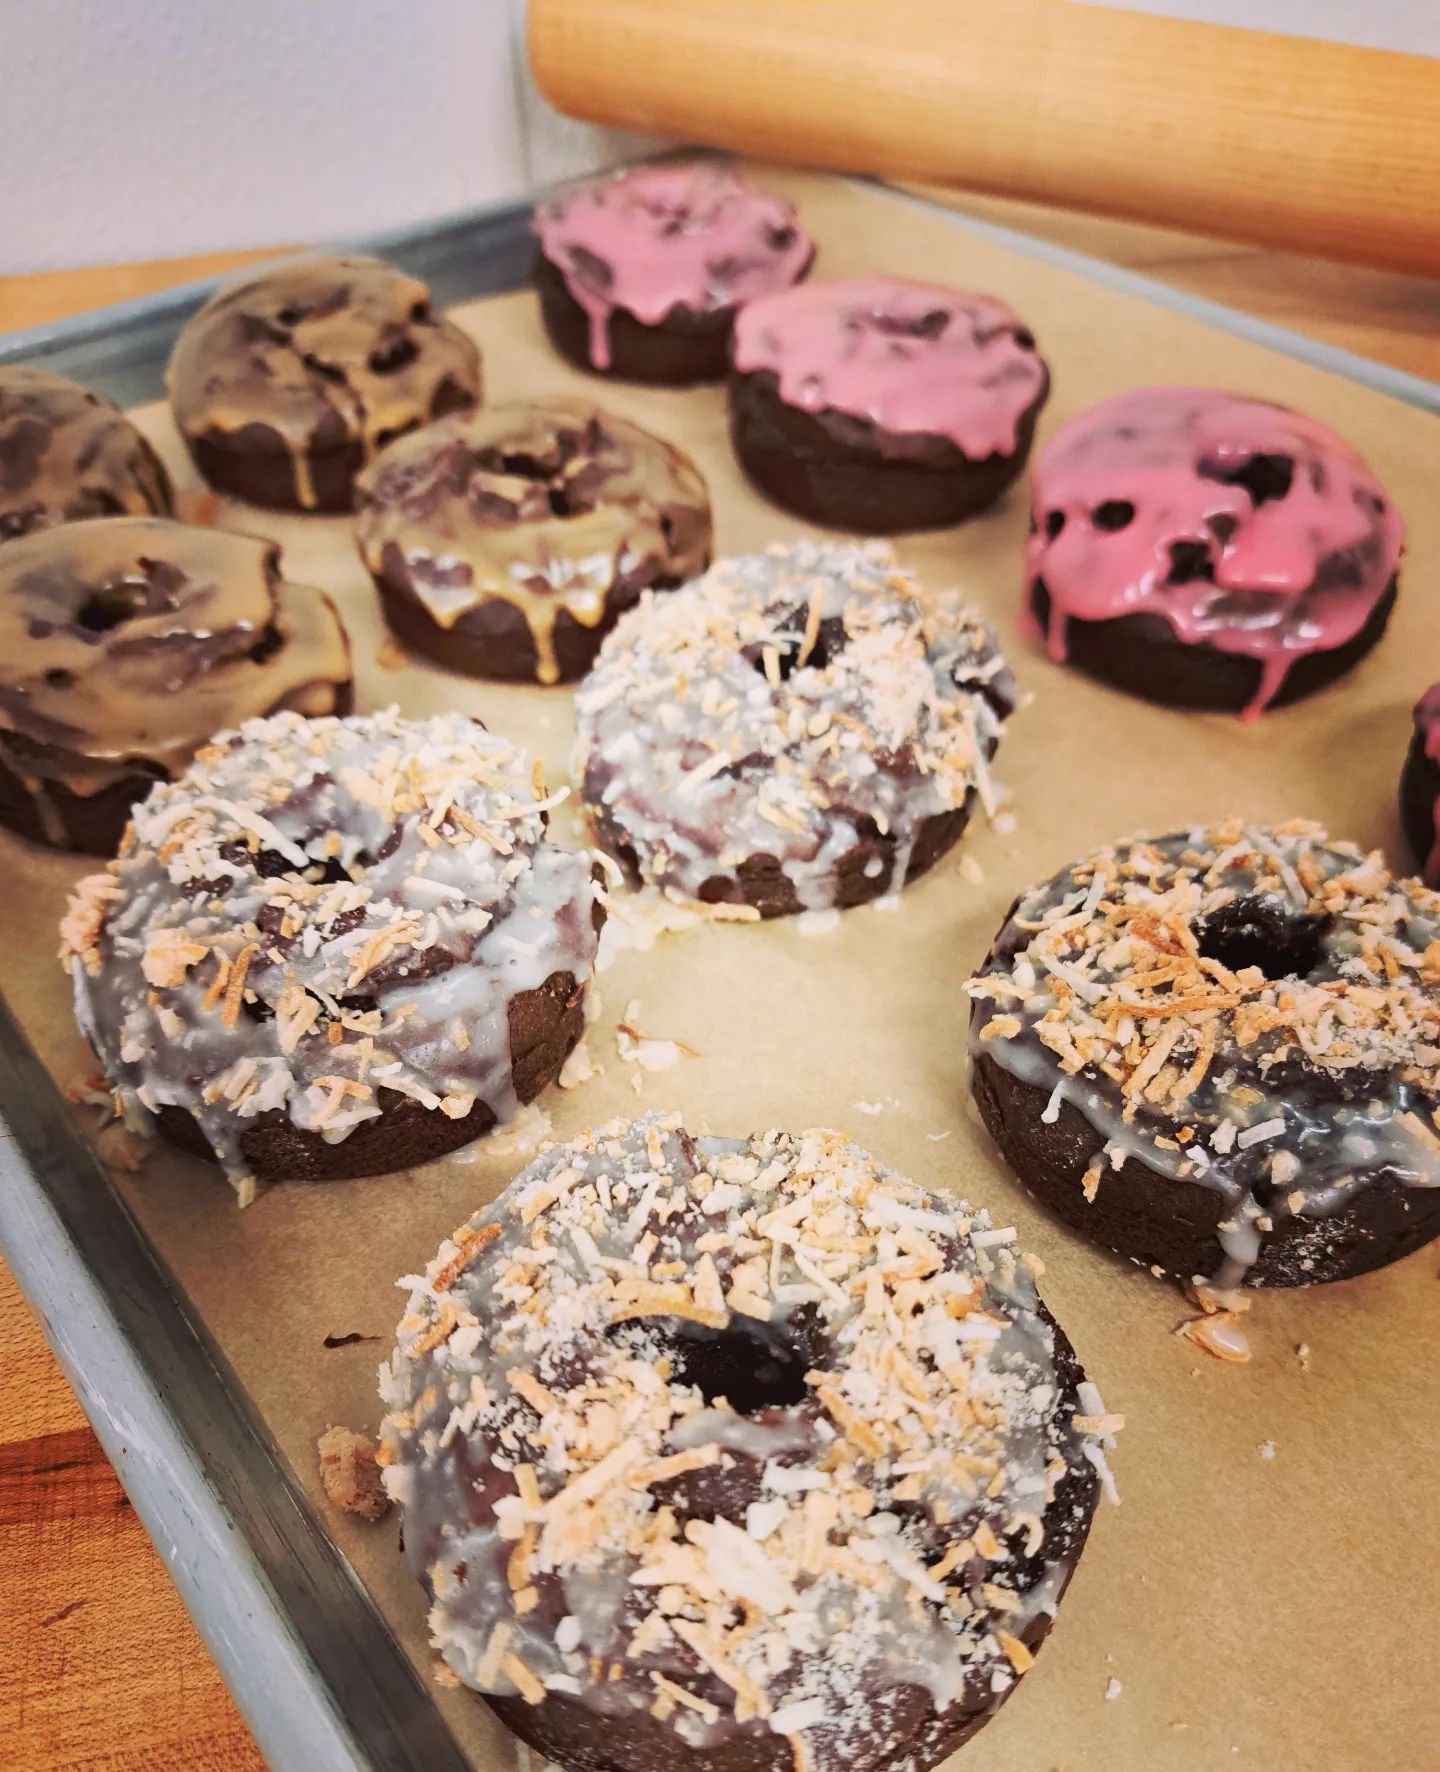 What a perfect Wednesday for a GF/VEGAN Donut and a delicious cup of @nimbusroasters coffee! We have three flavors to choose from so grab one while they last!

🍩 Toasted Coconut 
🍩 Espresso Glaze
🍩 Raspberry Glaze

#thepeakloco #longmont #longmont